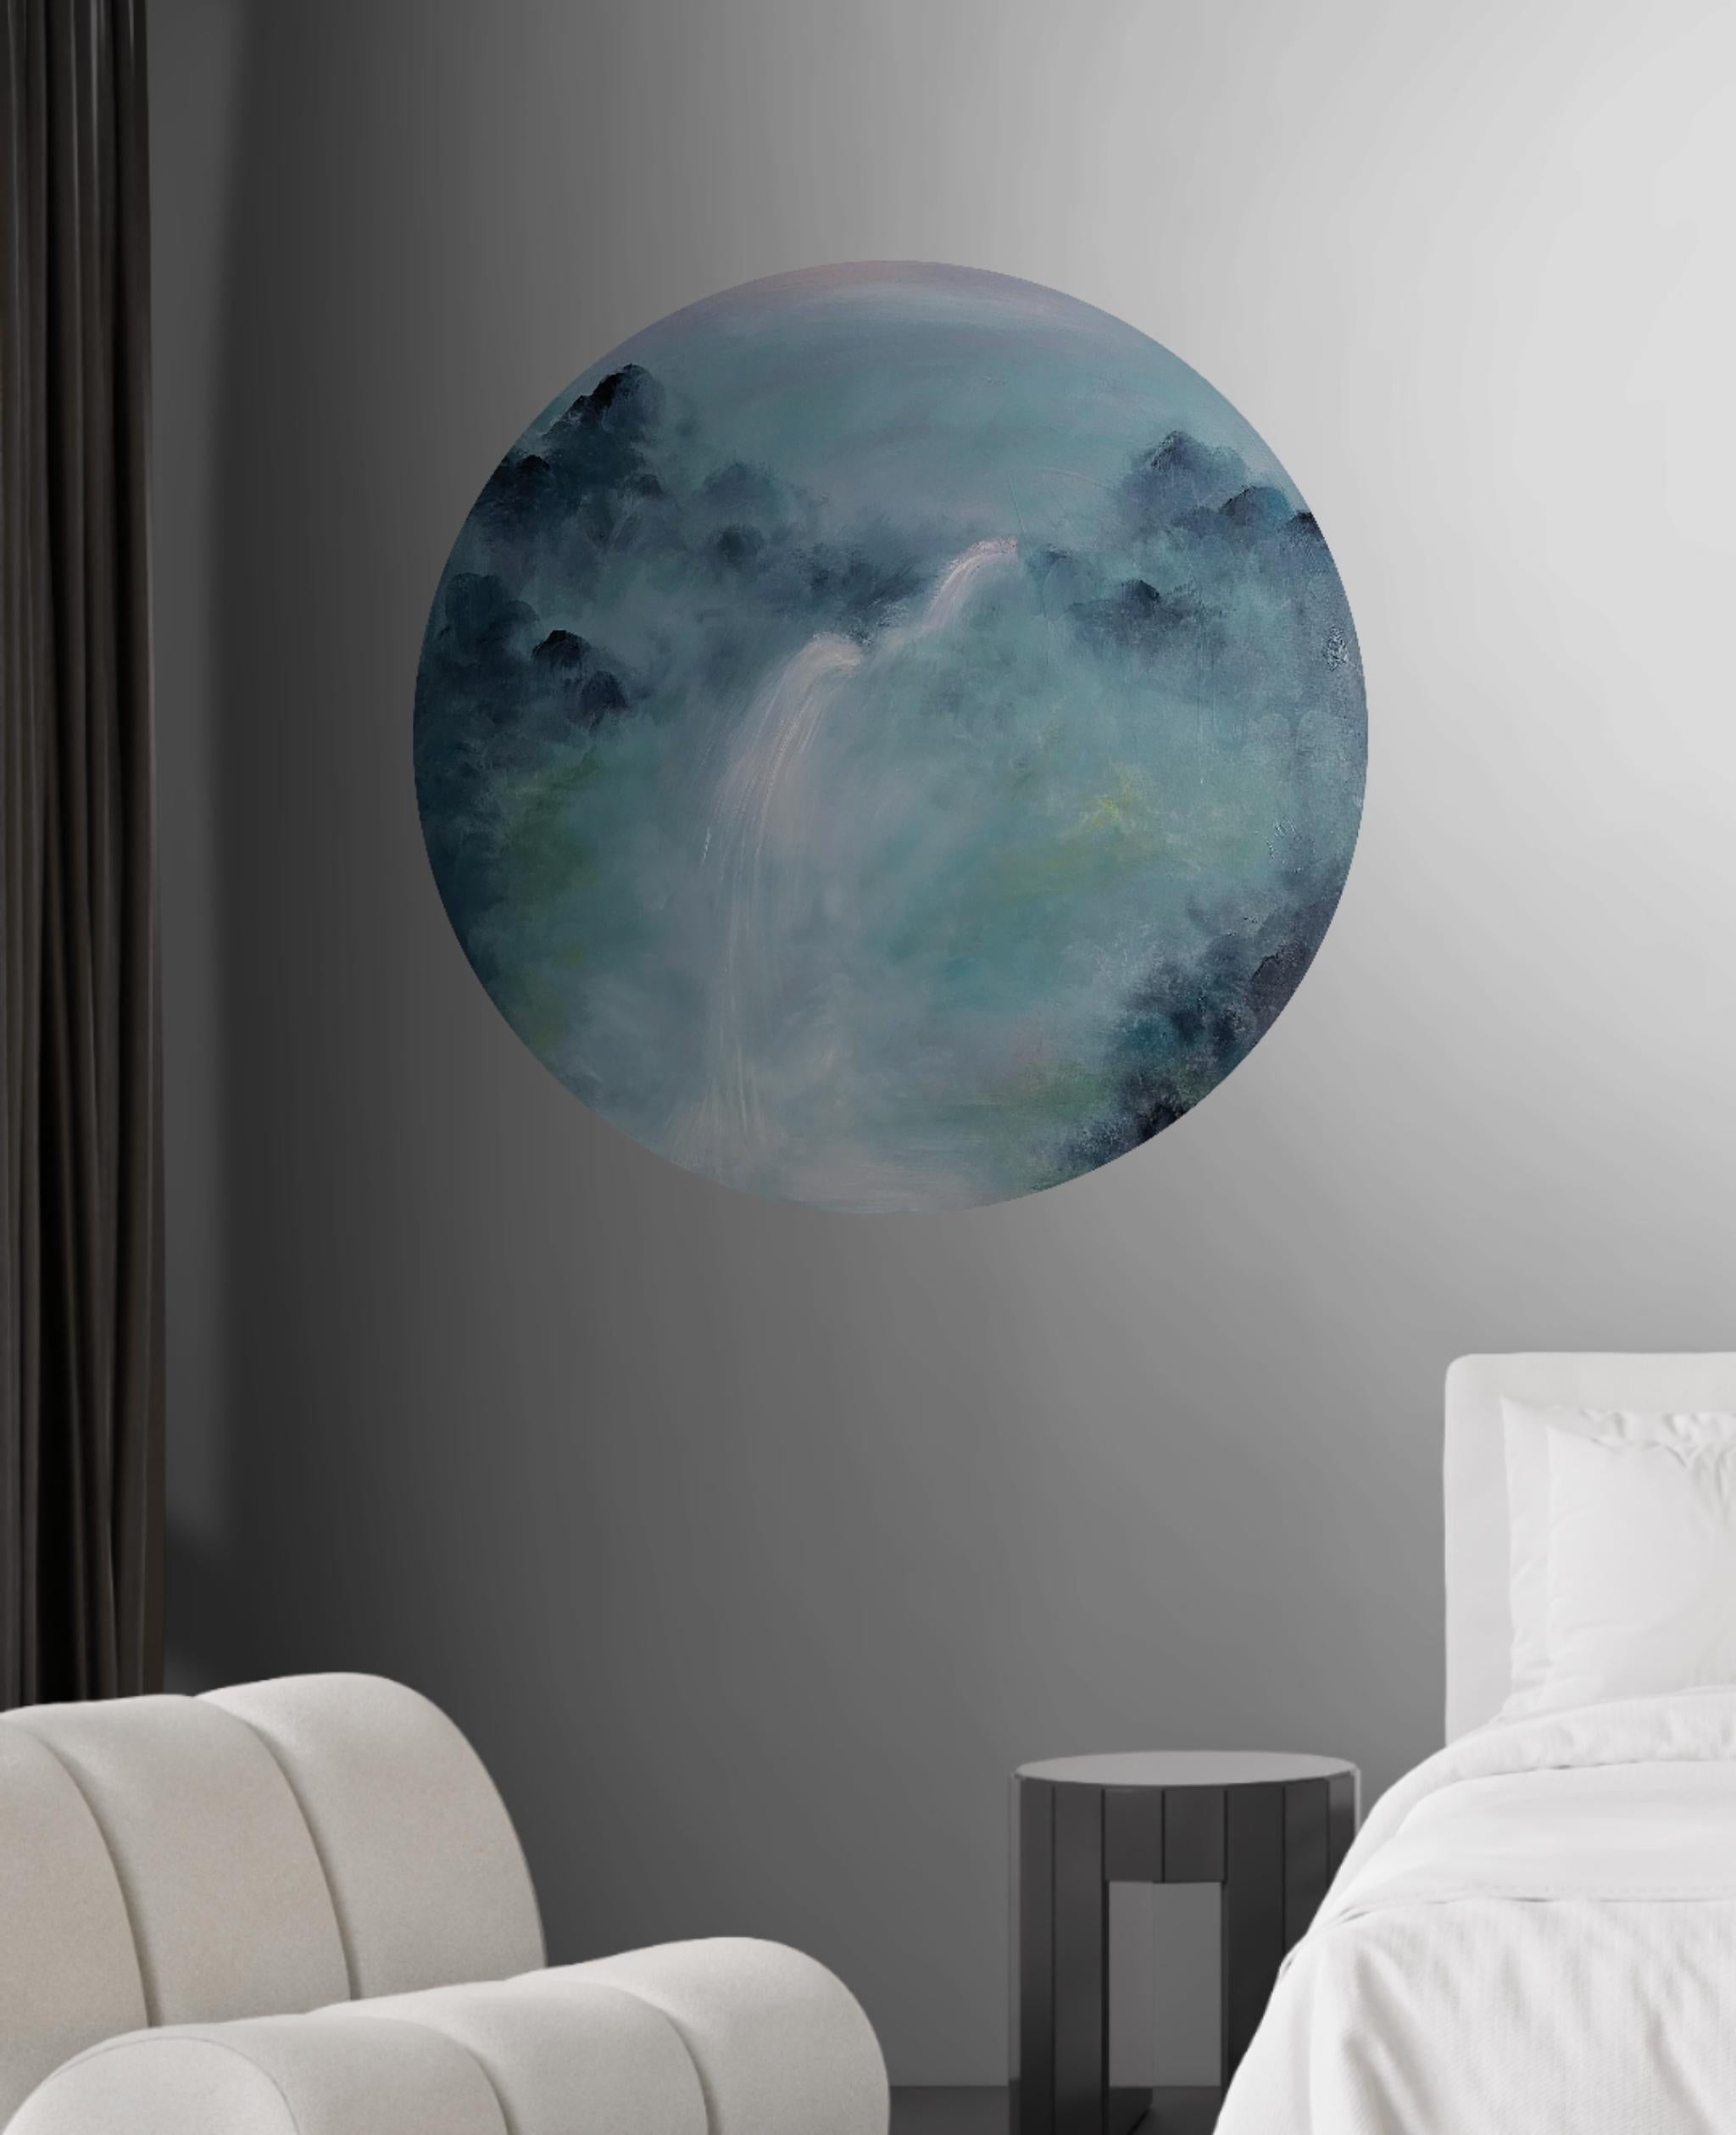 The Lark Ascending - Round canvas abstract landscape painting - Gray Abstract Painting by Jennifer L. Baker